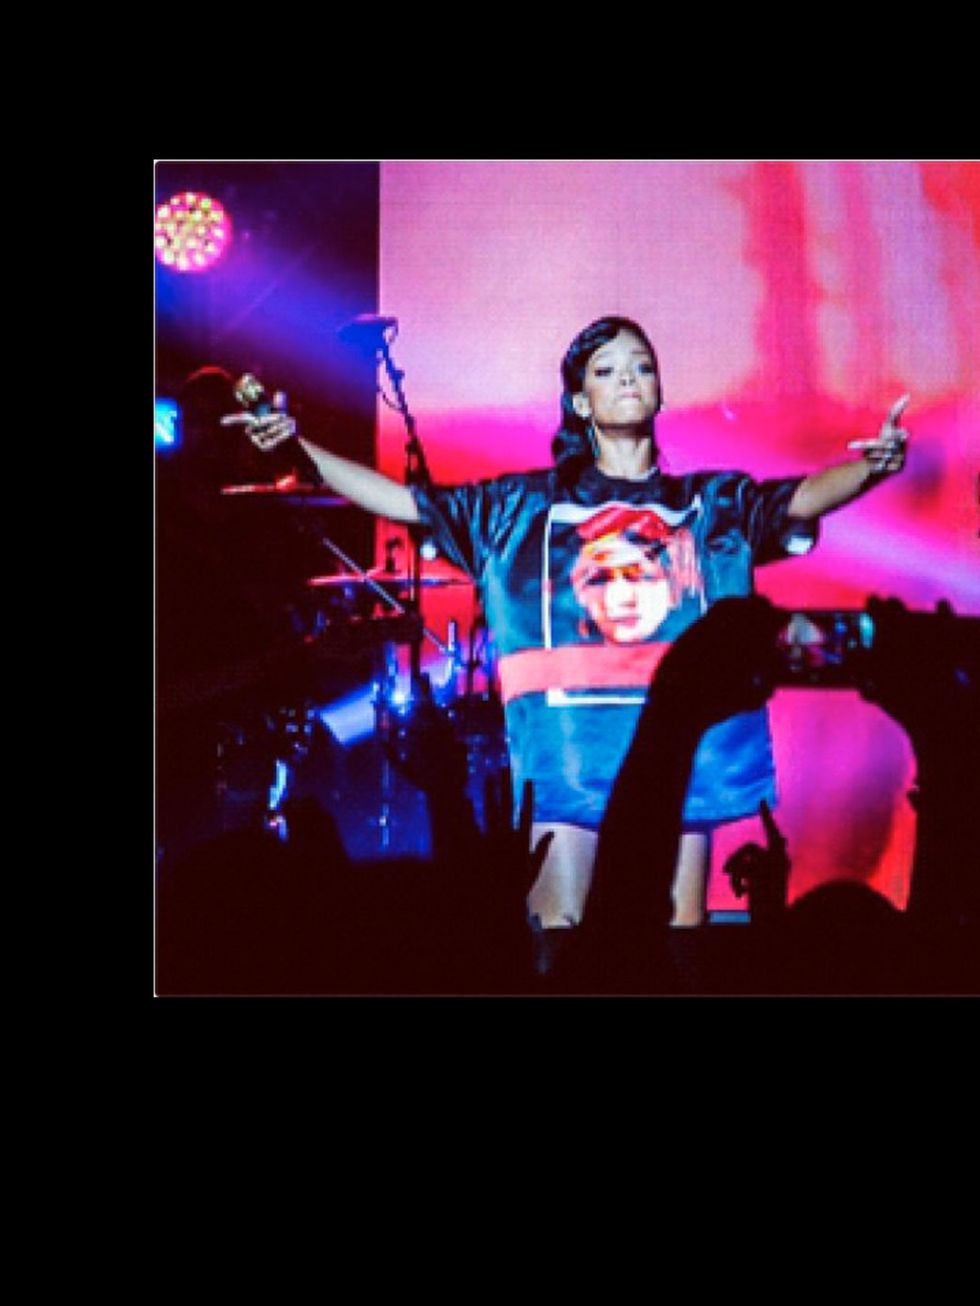 <p>'That Parisian concert t-shirt face controversy #rihanna777tour rumbles on. Any idea who it is?'</p>